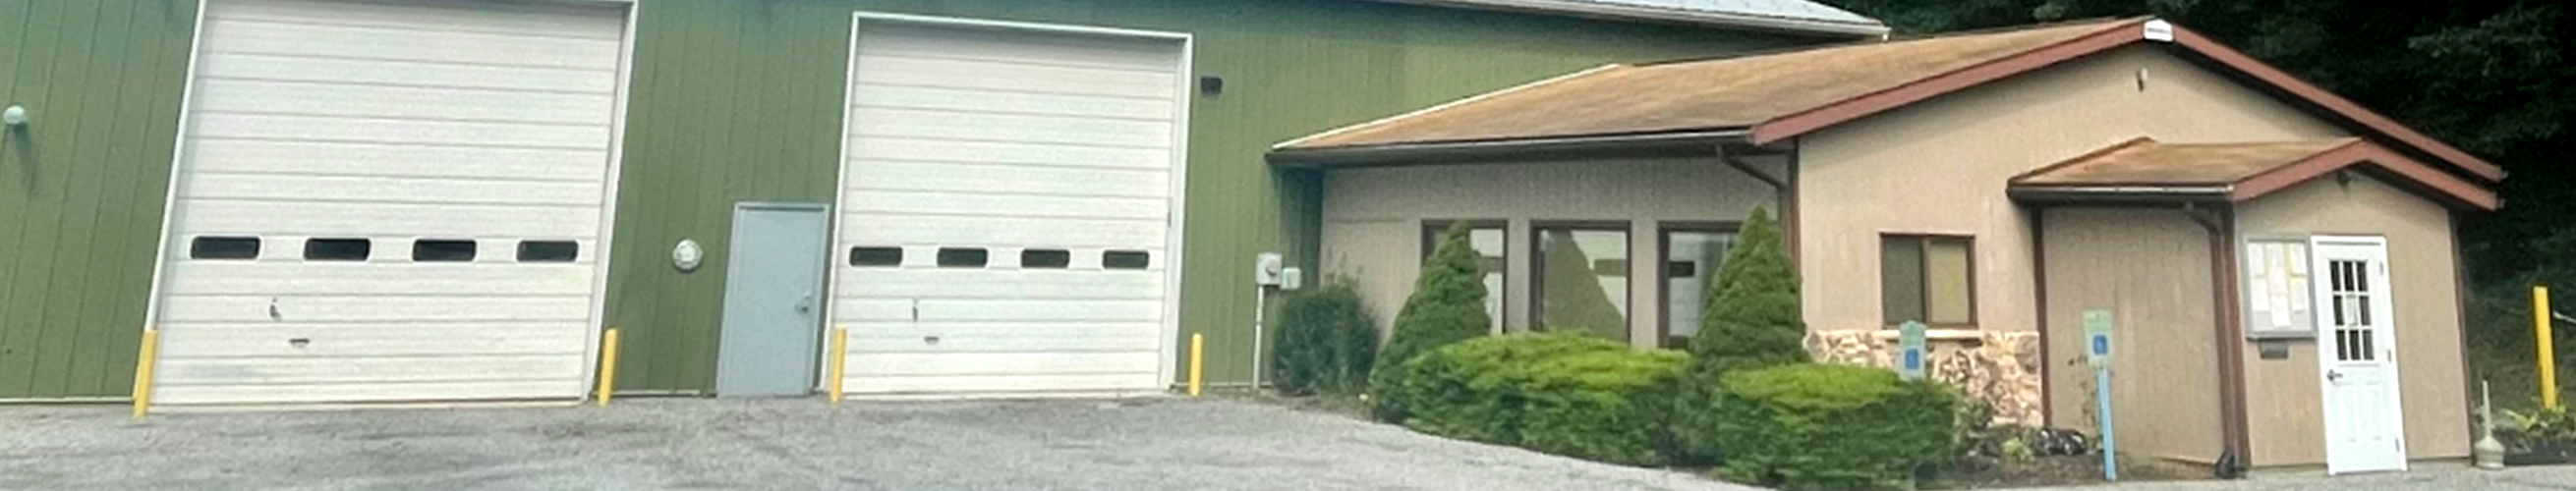 Image of Tyrone Township Office Building